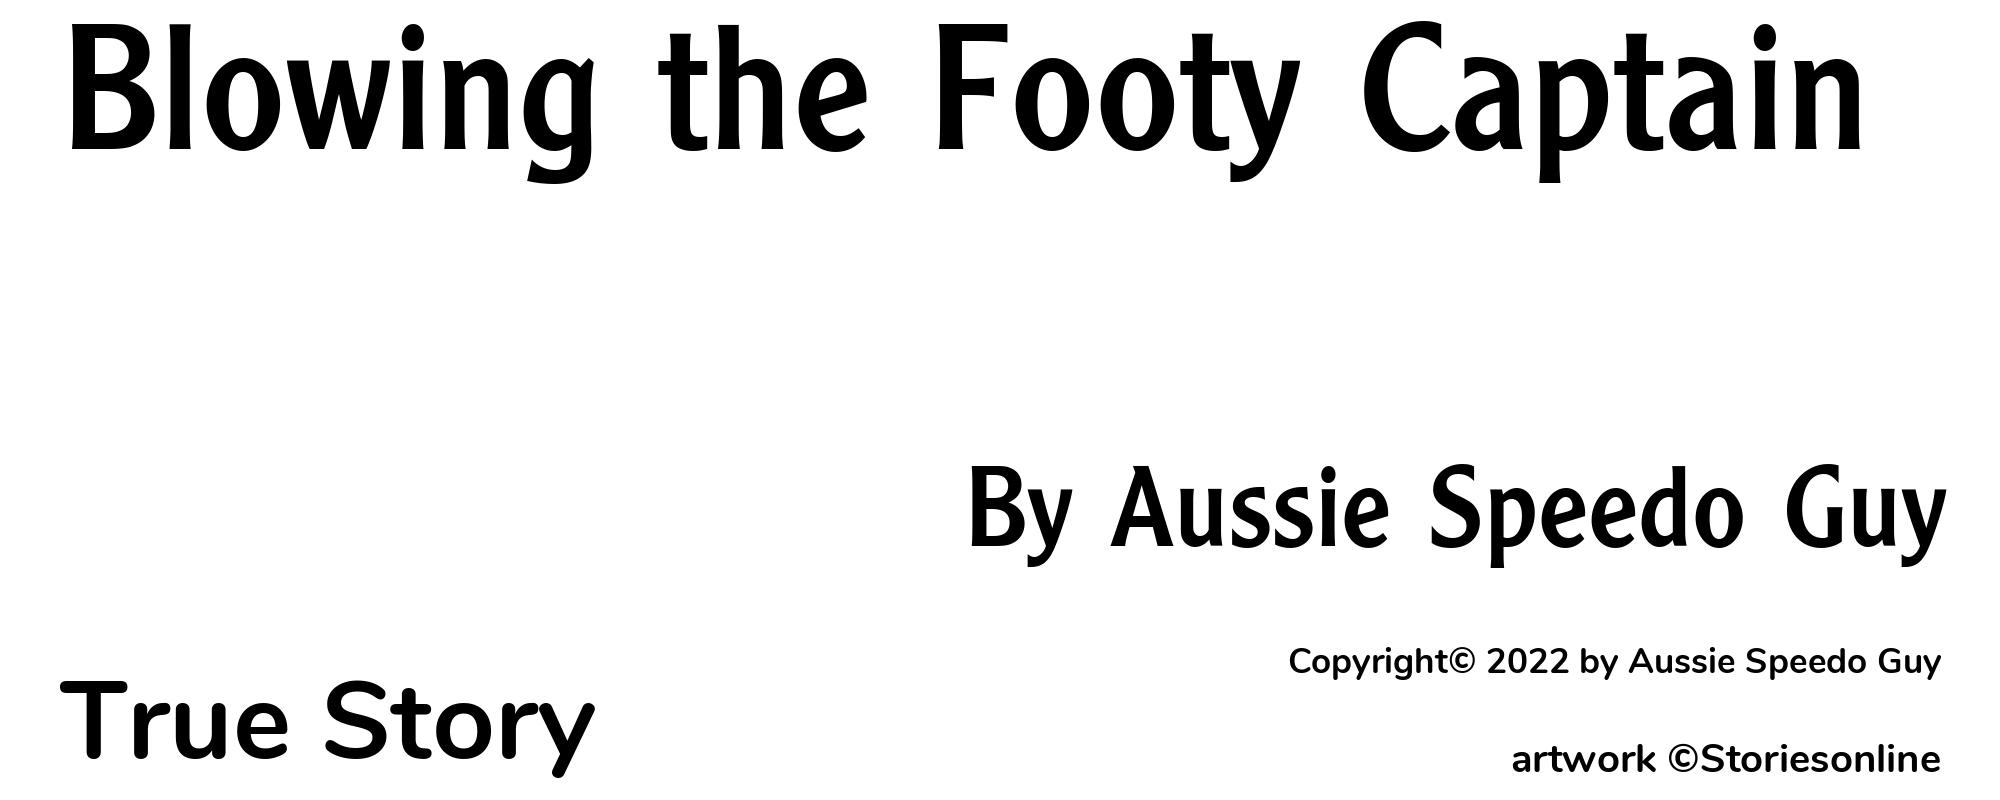 Blowing the Footy Captain - Cover